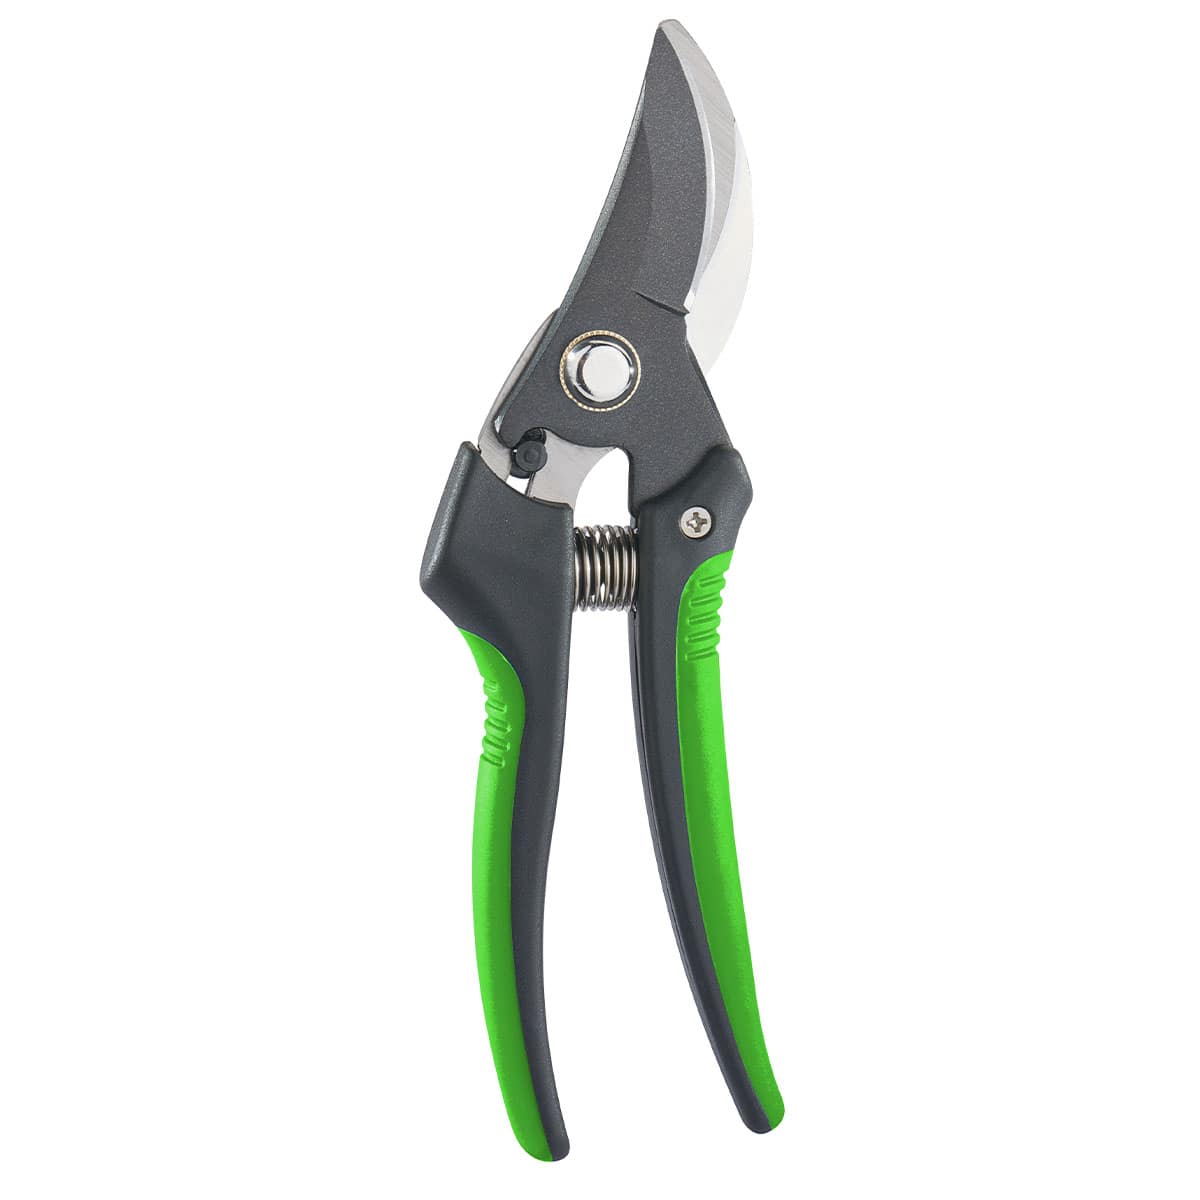 8″ Pruning Shears Bundled with 3″ x 50″ Landscape Fabric